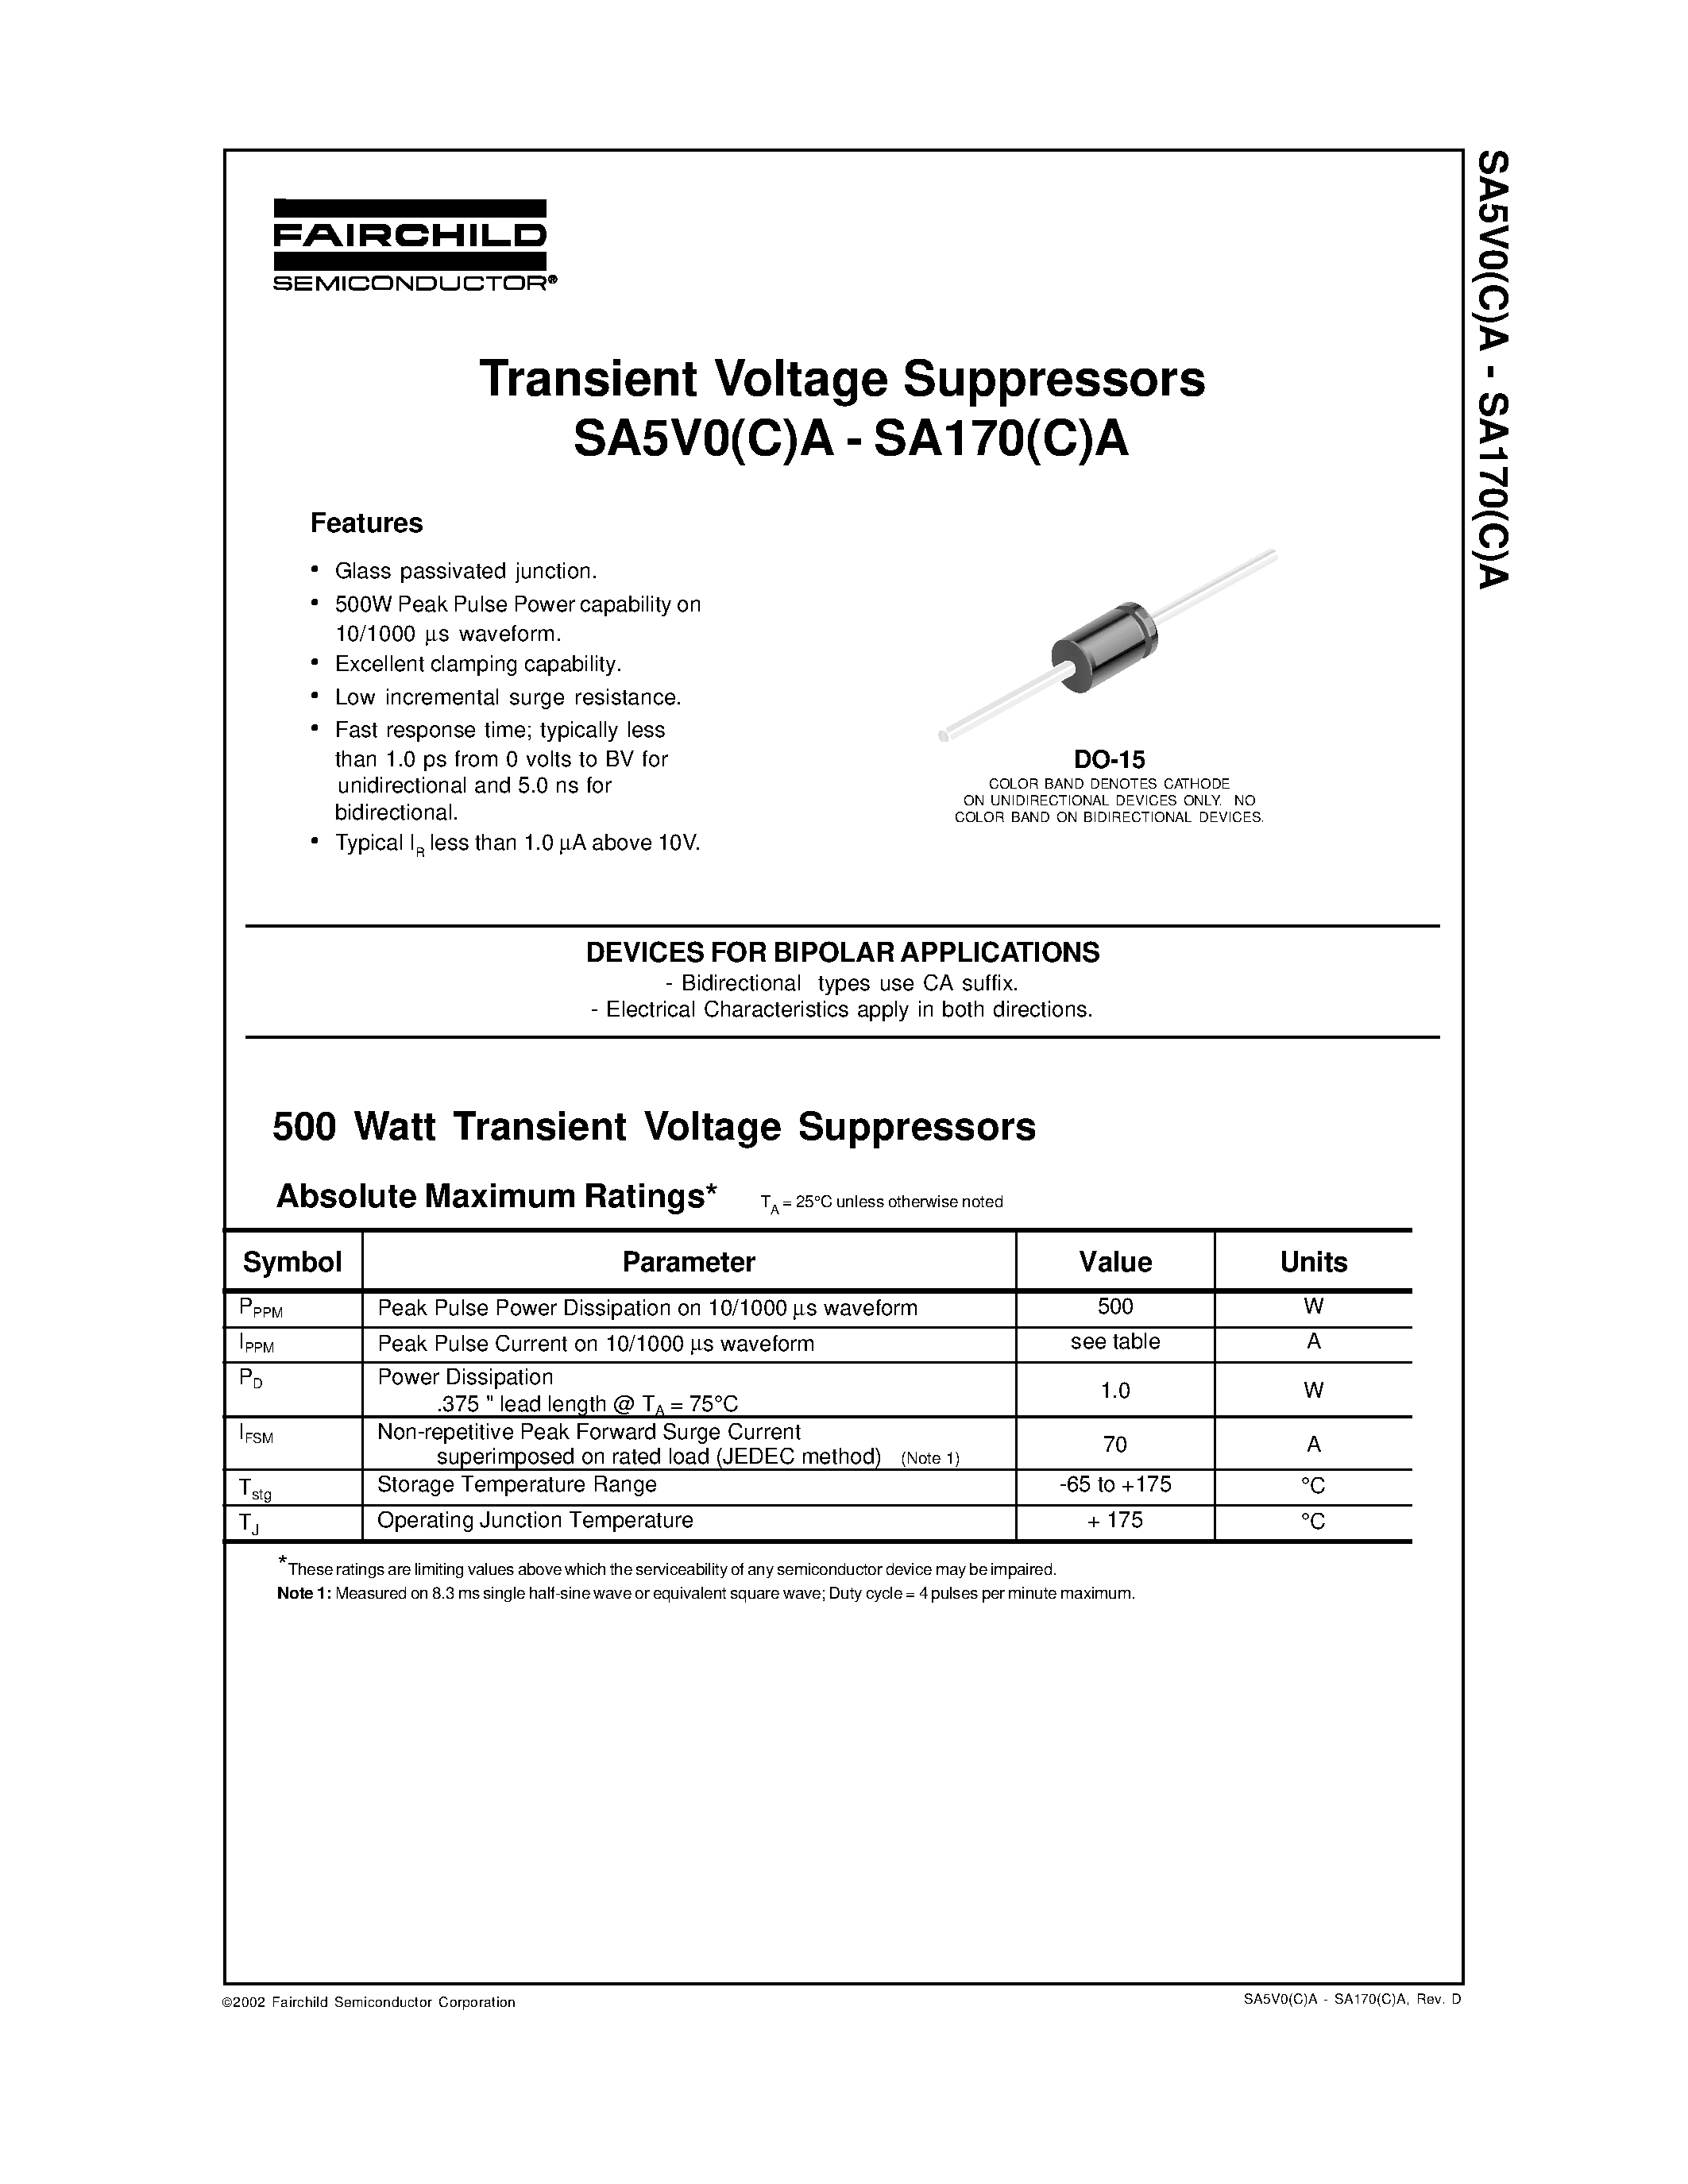 Datasheet SA33A - Transient Voltage Suppressors page 1